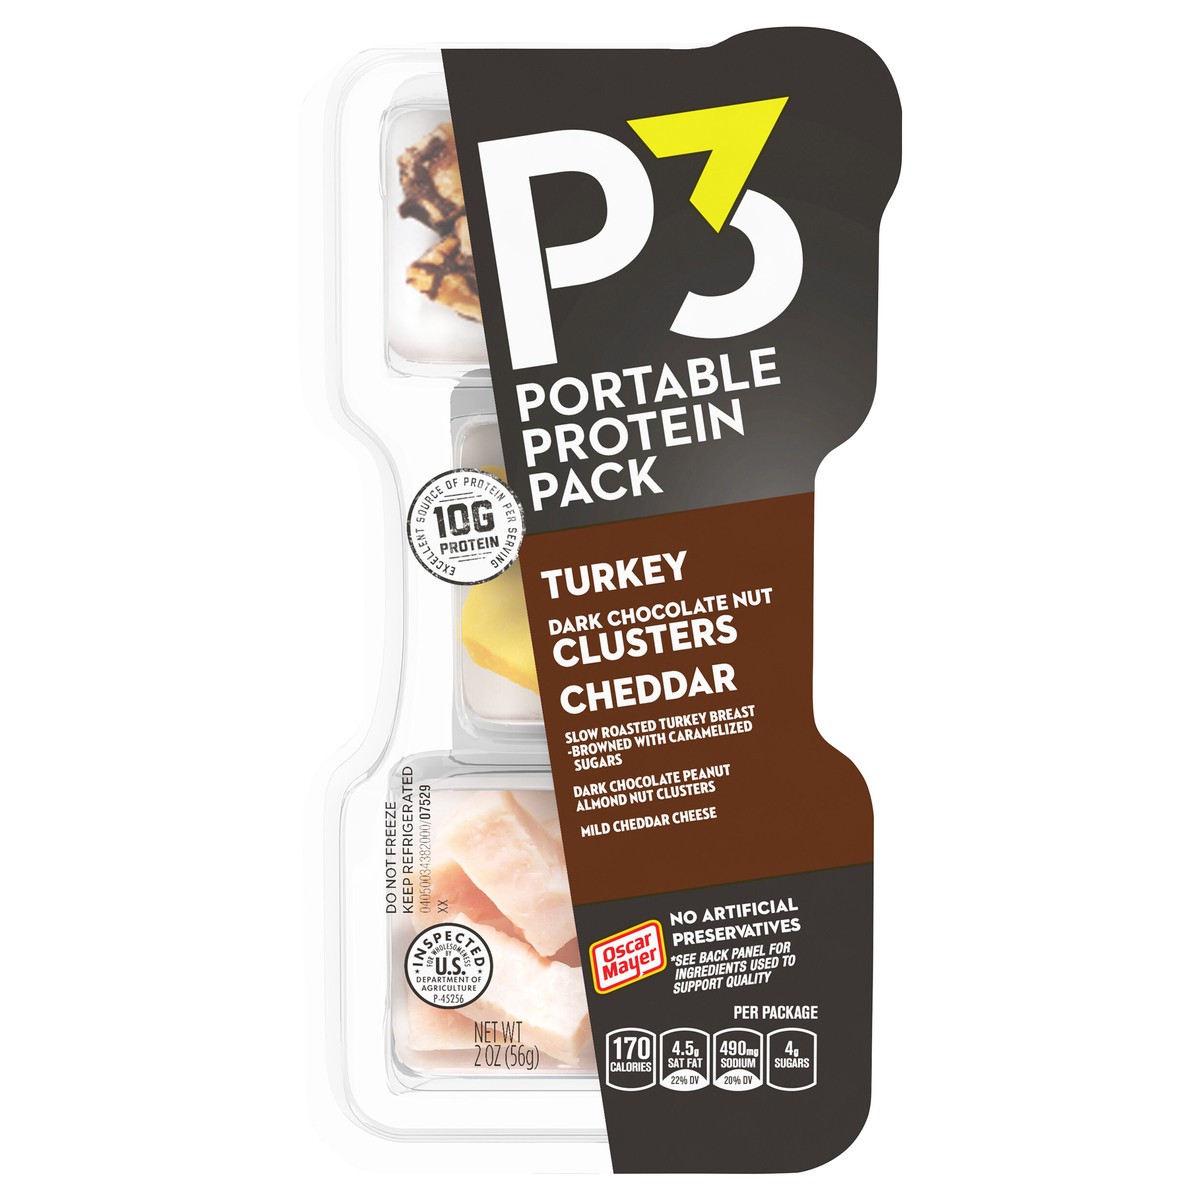 slide 1 of 9, P3 Portable Protein Snack Pack with Dark Chocolate Almond Nut Clusters, Turkey & Cheddar Cheese, 2 oz Tray, 2 oz